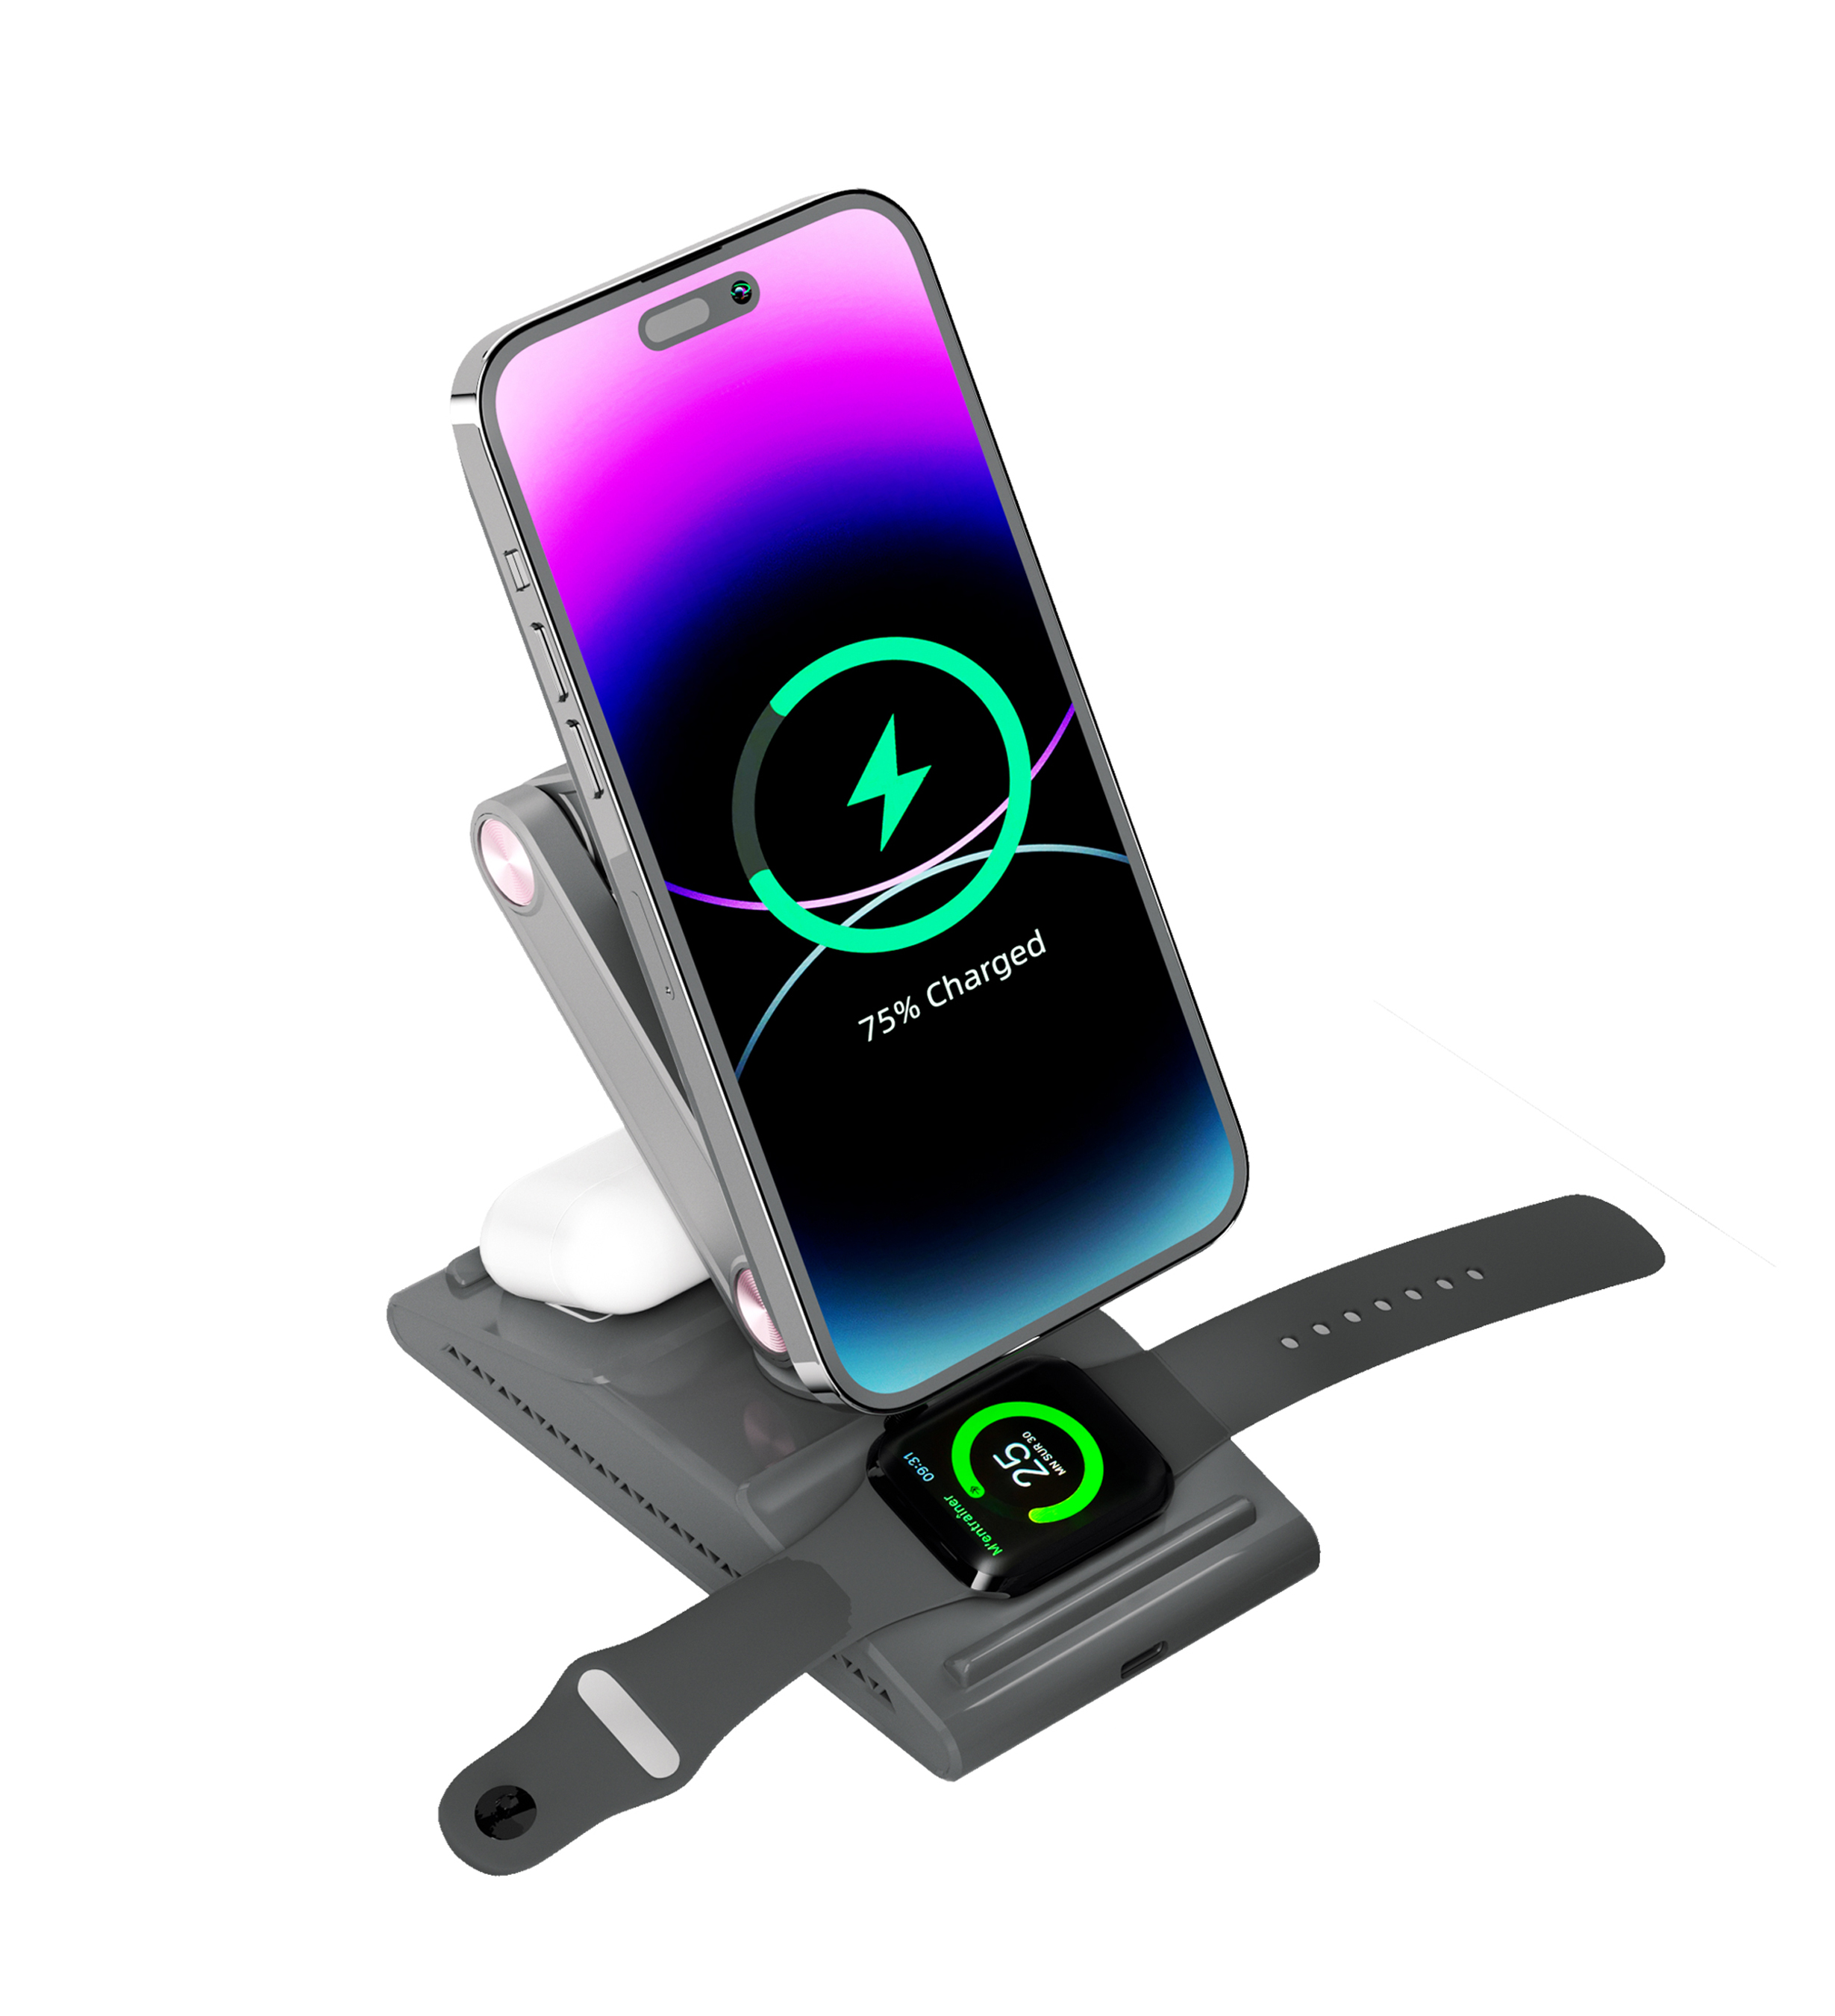 Innodude Foldable Travel Wireless Charger